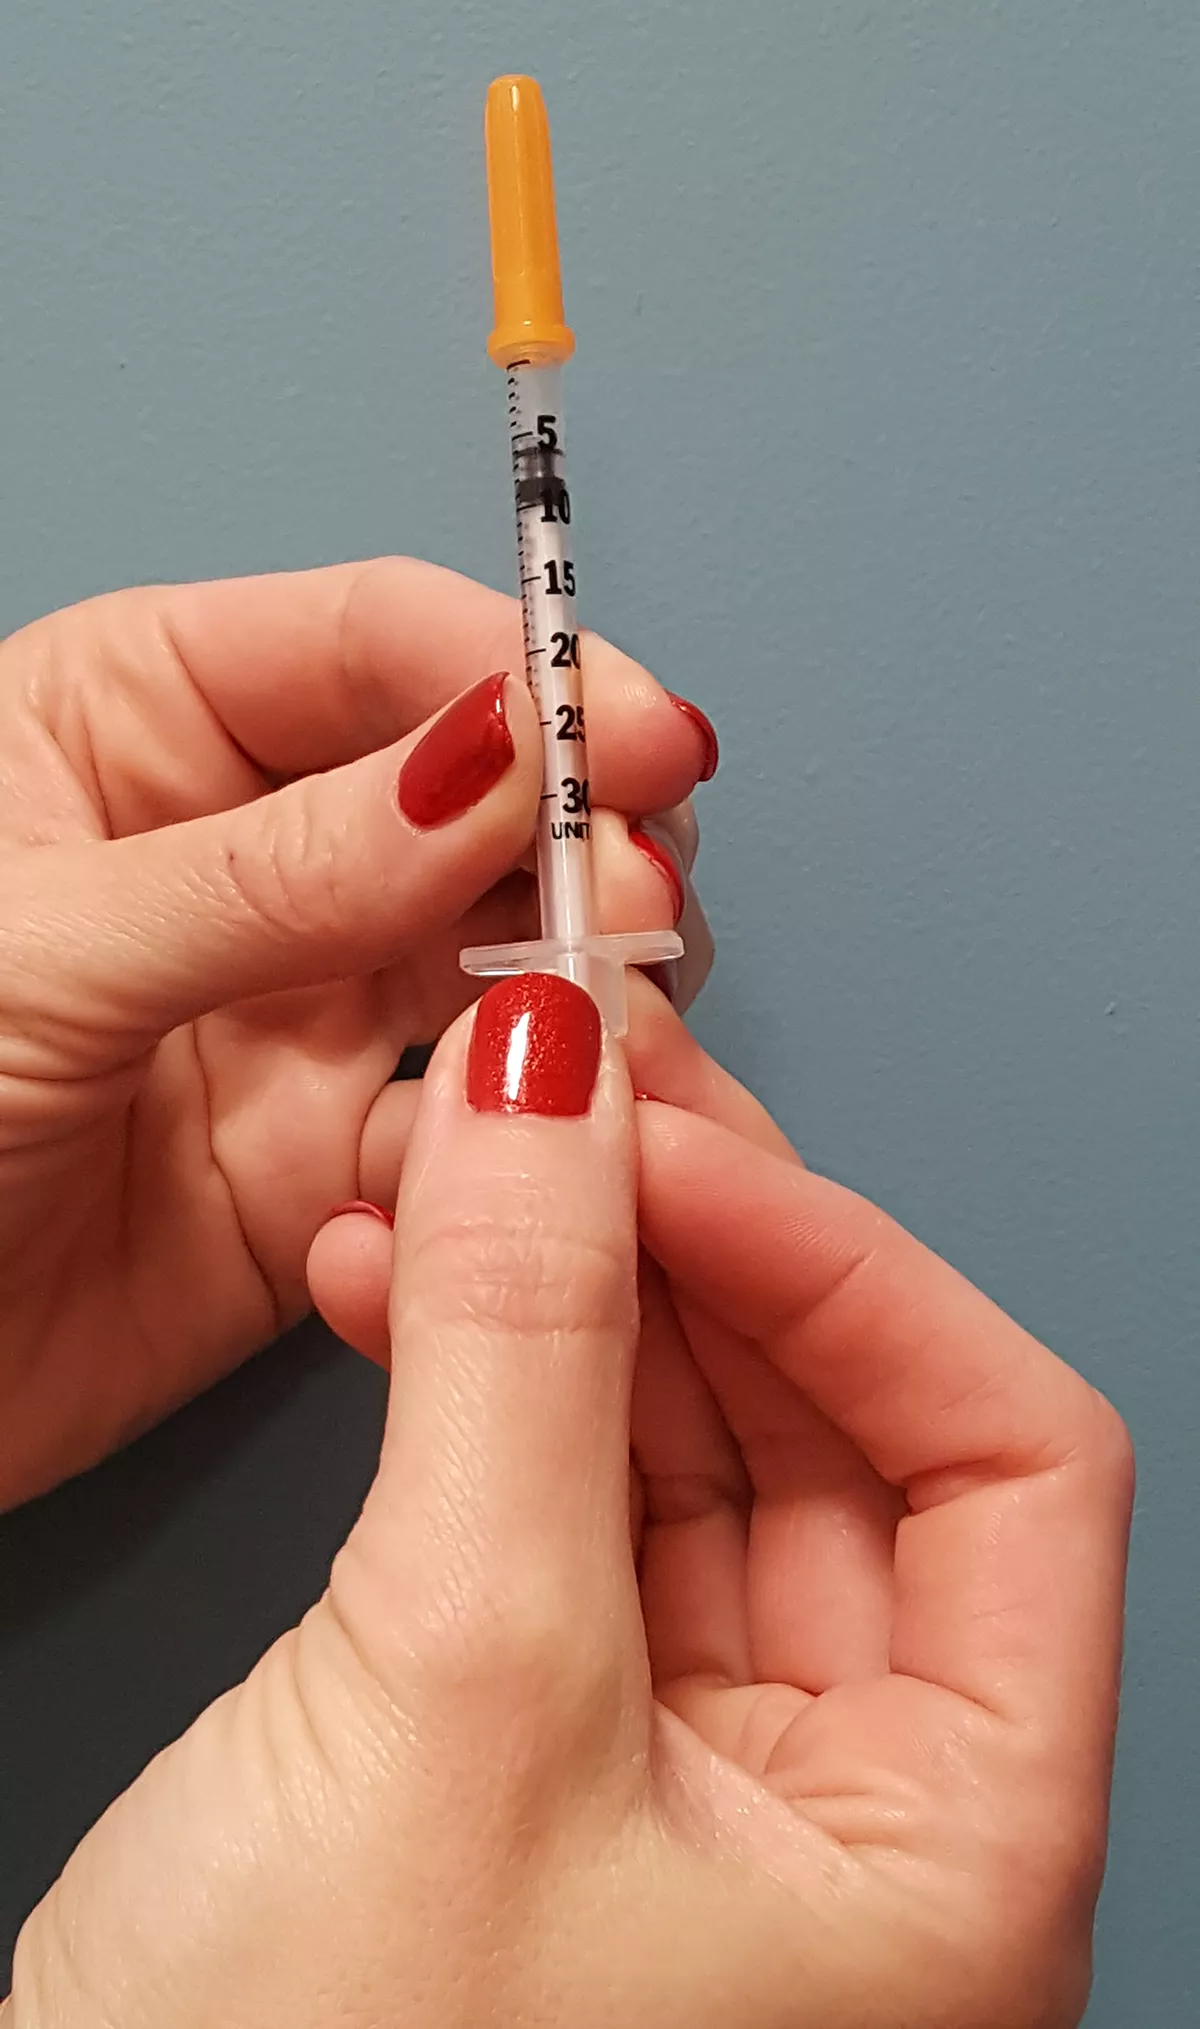 insulin drawing are into syringe, photo